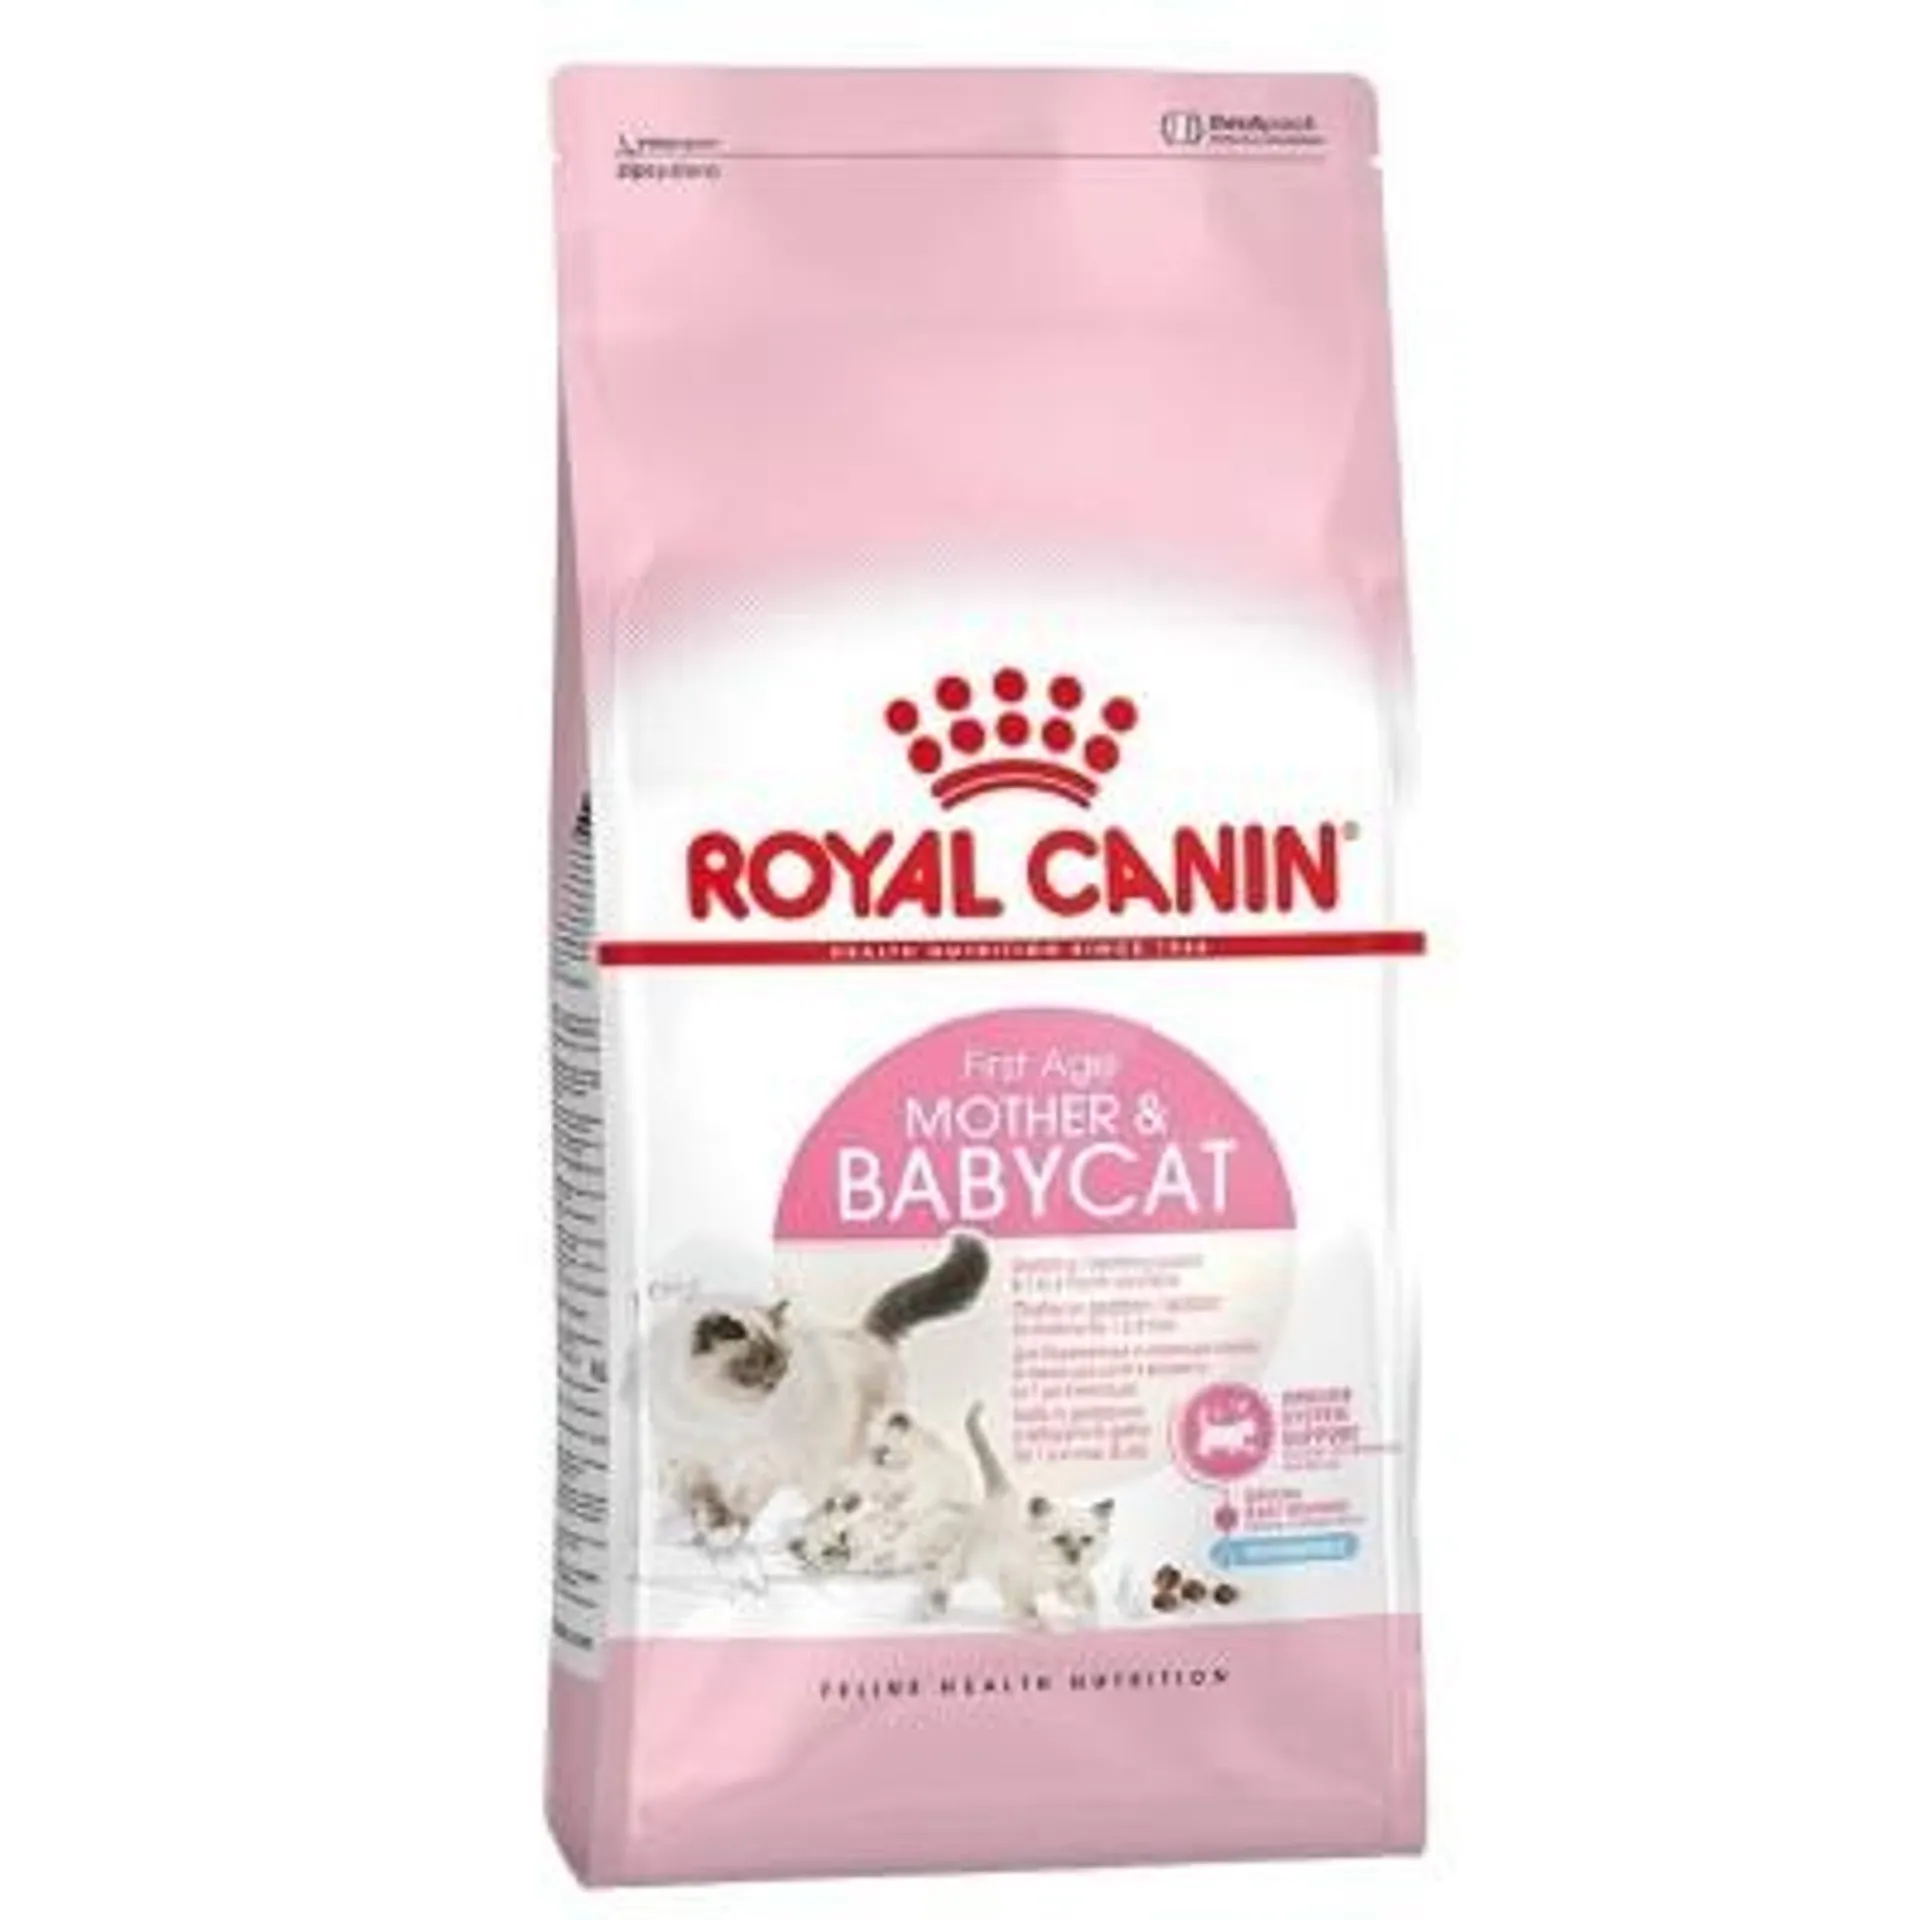 ROYAL CANIN GATO MOTHER Y BABYCAT